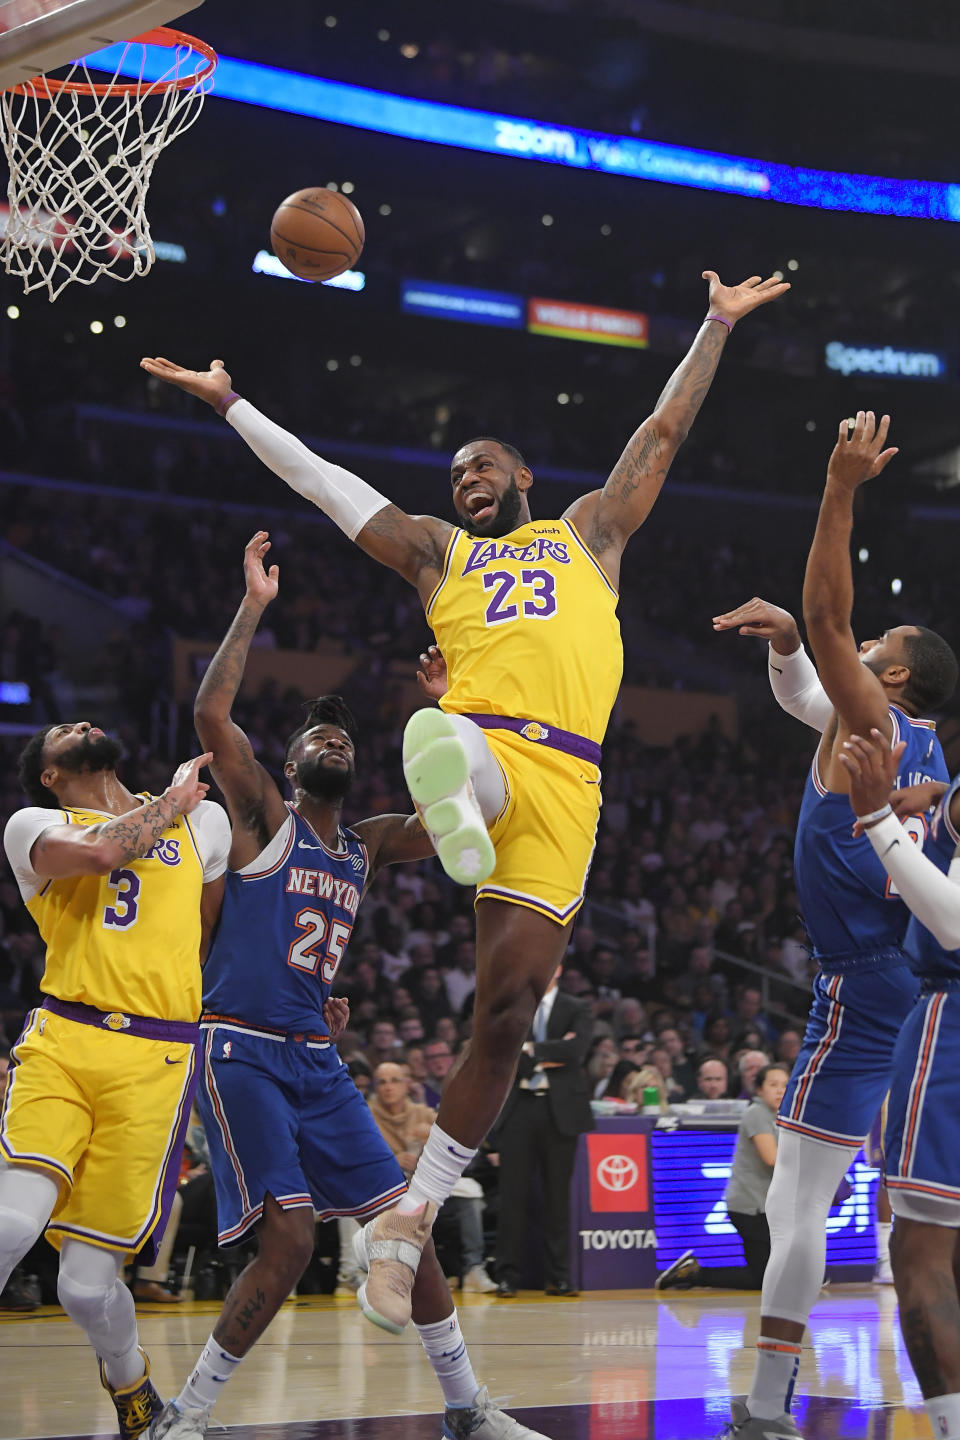 Los Angeles Lakers forward LeBron James (23) has the ball knocked from his hands while trying to shoot by New York Knicks guard Wayne Ellington, right, as forward Anthony Davis, left, and guard Reggie Bullock vie for position during the first half of an NBA basketball game Tuesday, Jan. 7, 2020, in Los Angeles. (AP Photo/Mark J. Terrill)